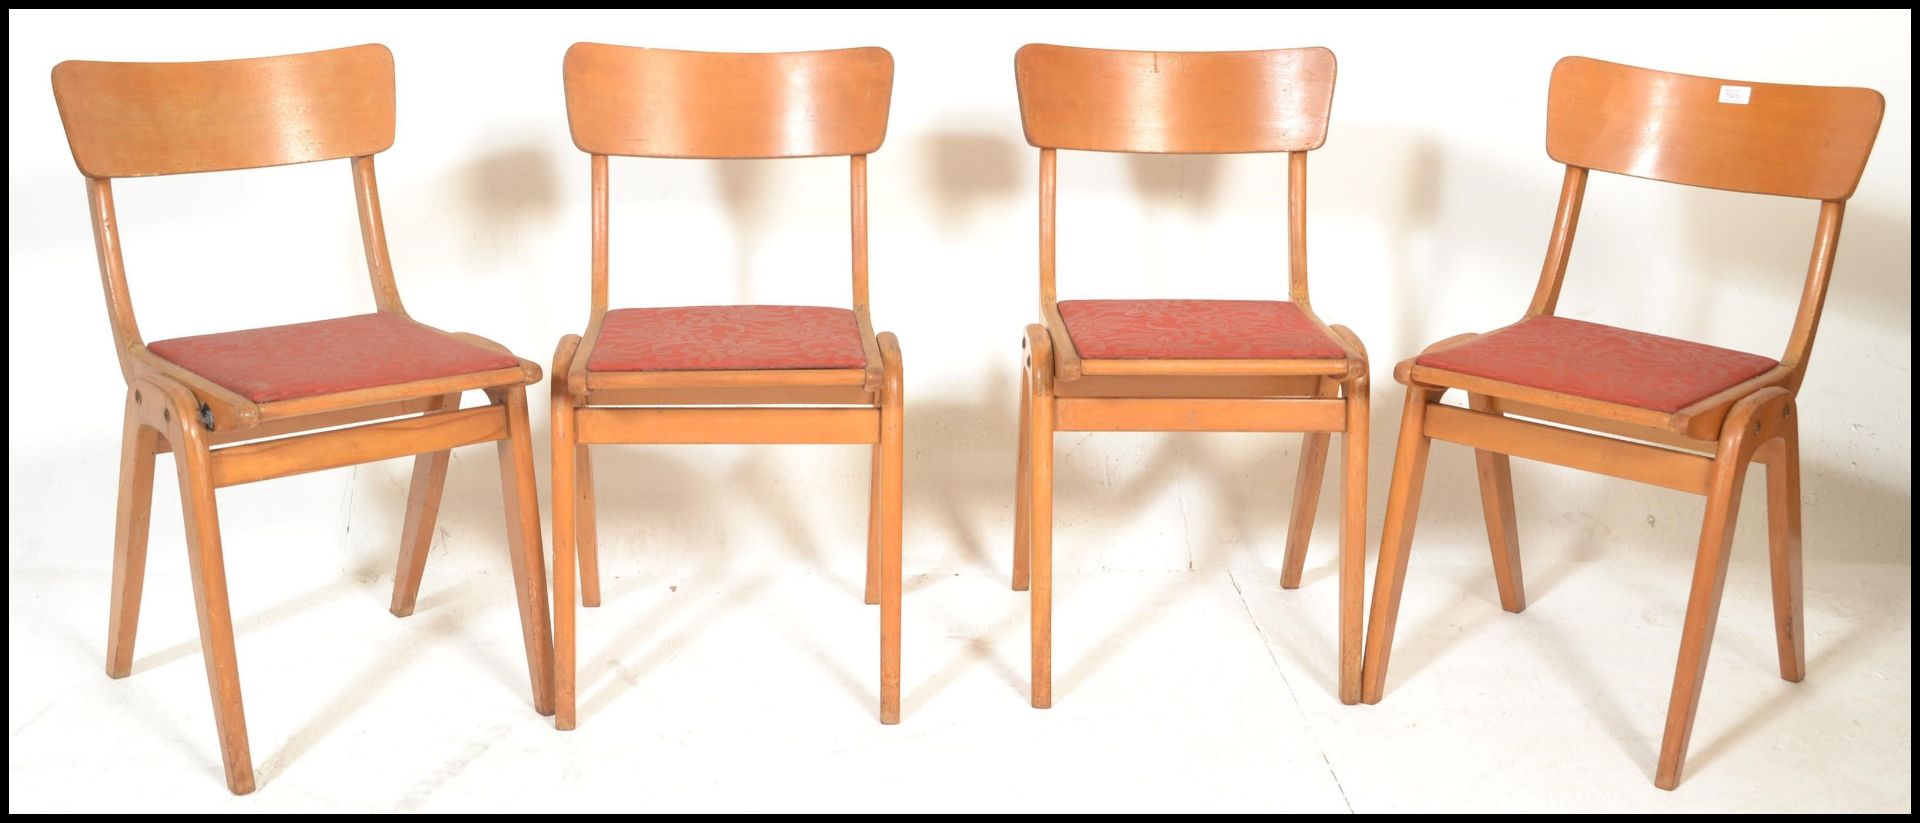 A set of 4 mid century stacking dining chairs in the manner of Ben Chairs. Beechwood bentwood a-